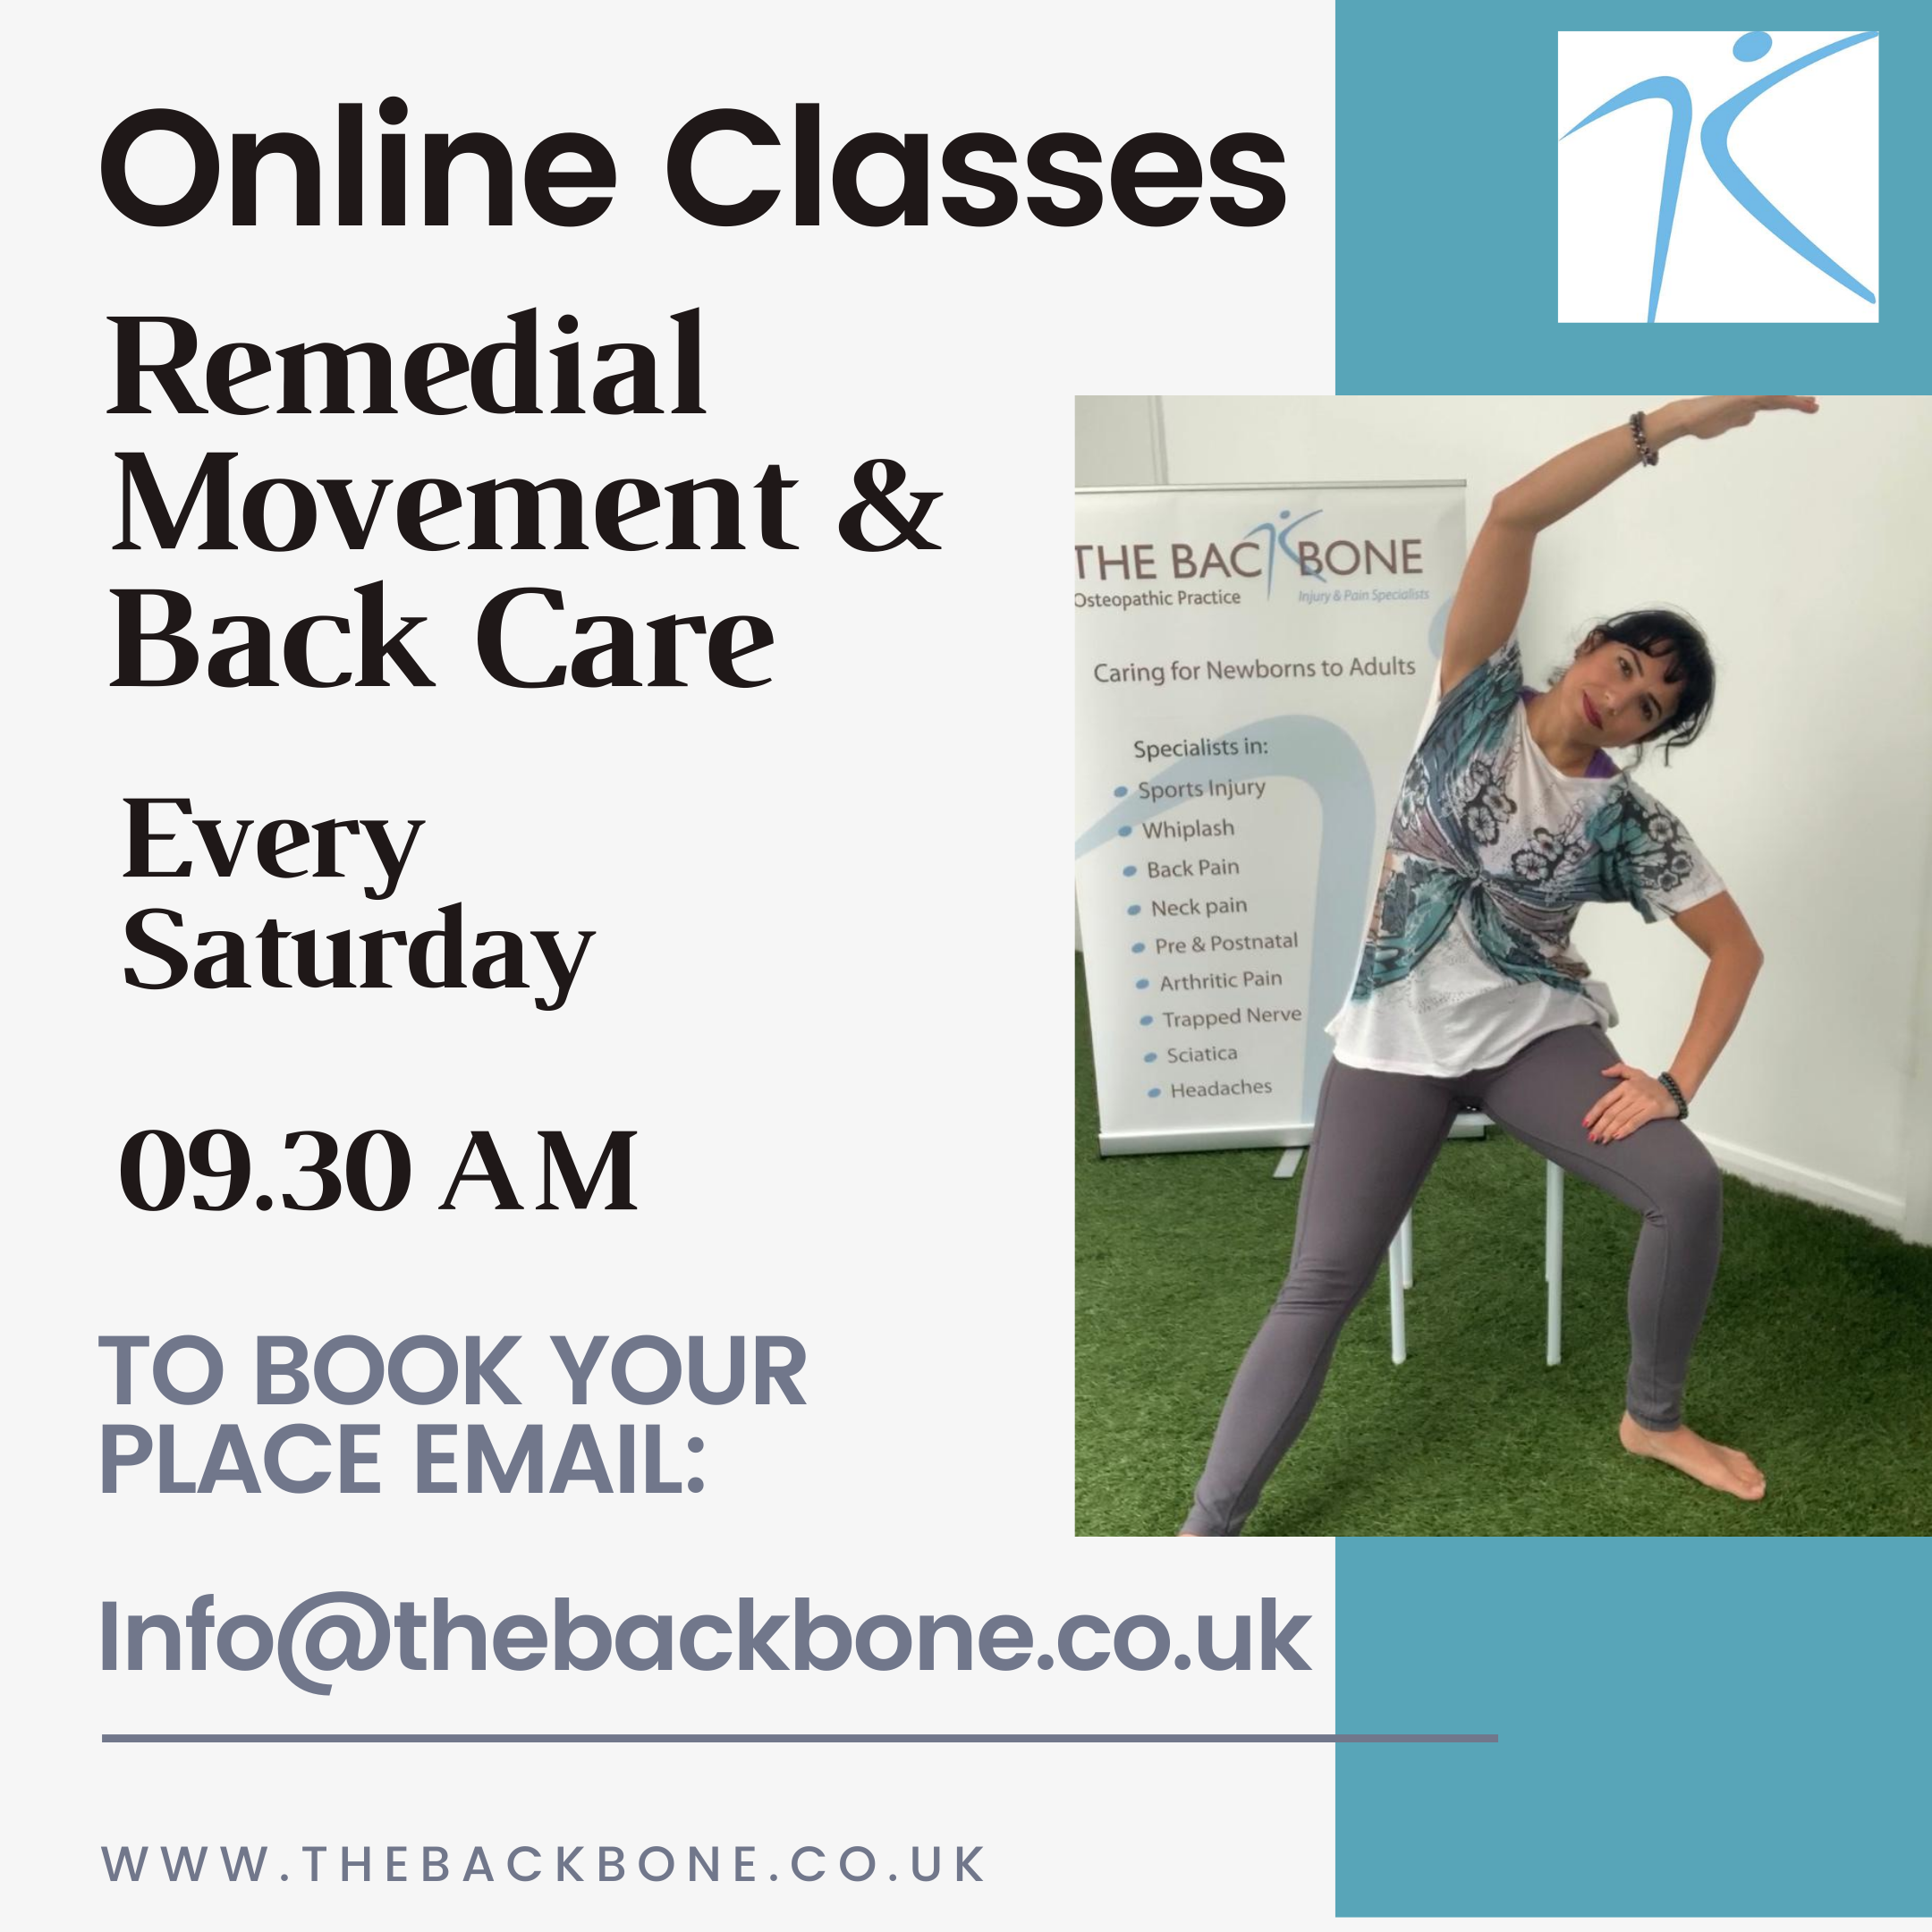 online exercise, chair yoga, remedial exercise, backcare, stretches, osteopathy, thebackboneosteopath, back pain, pain management